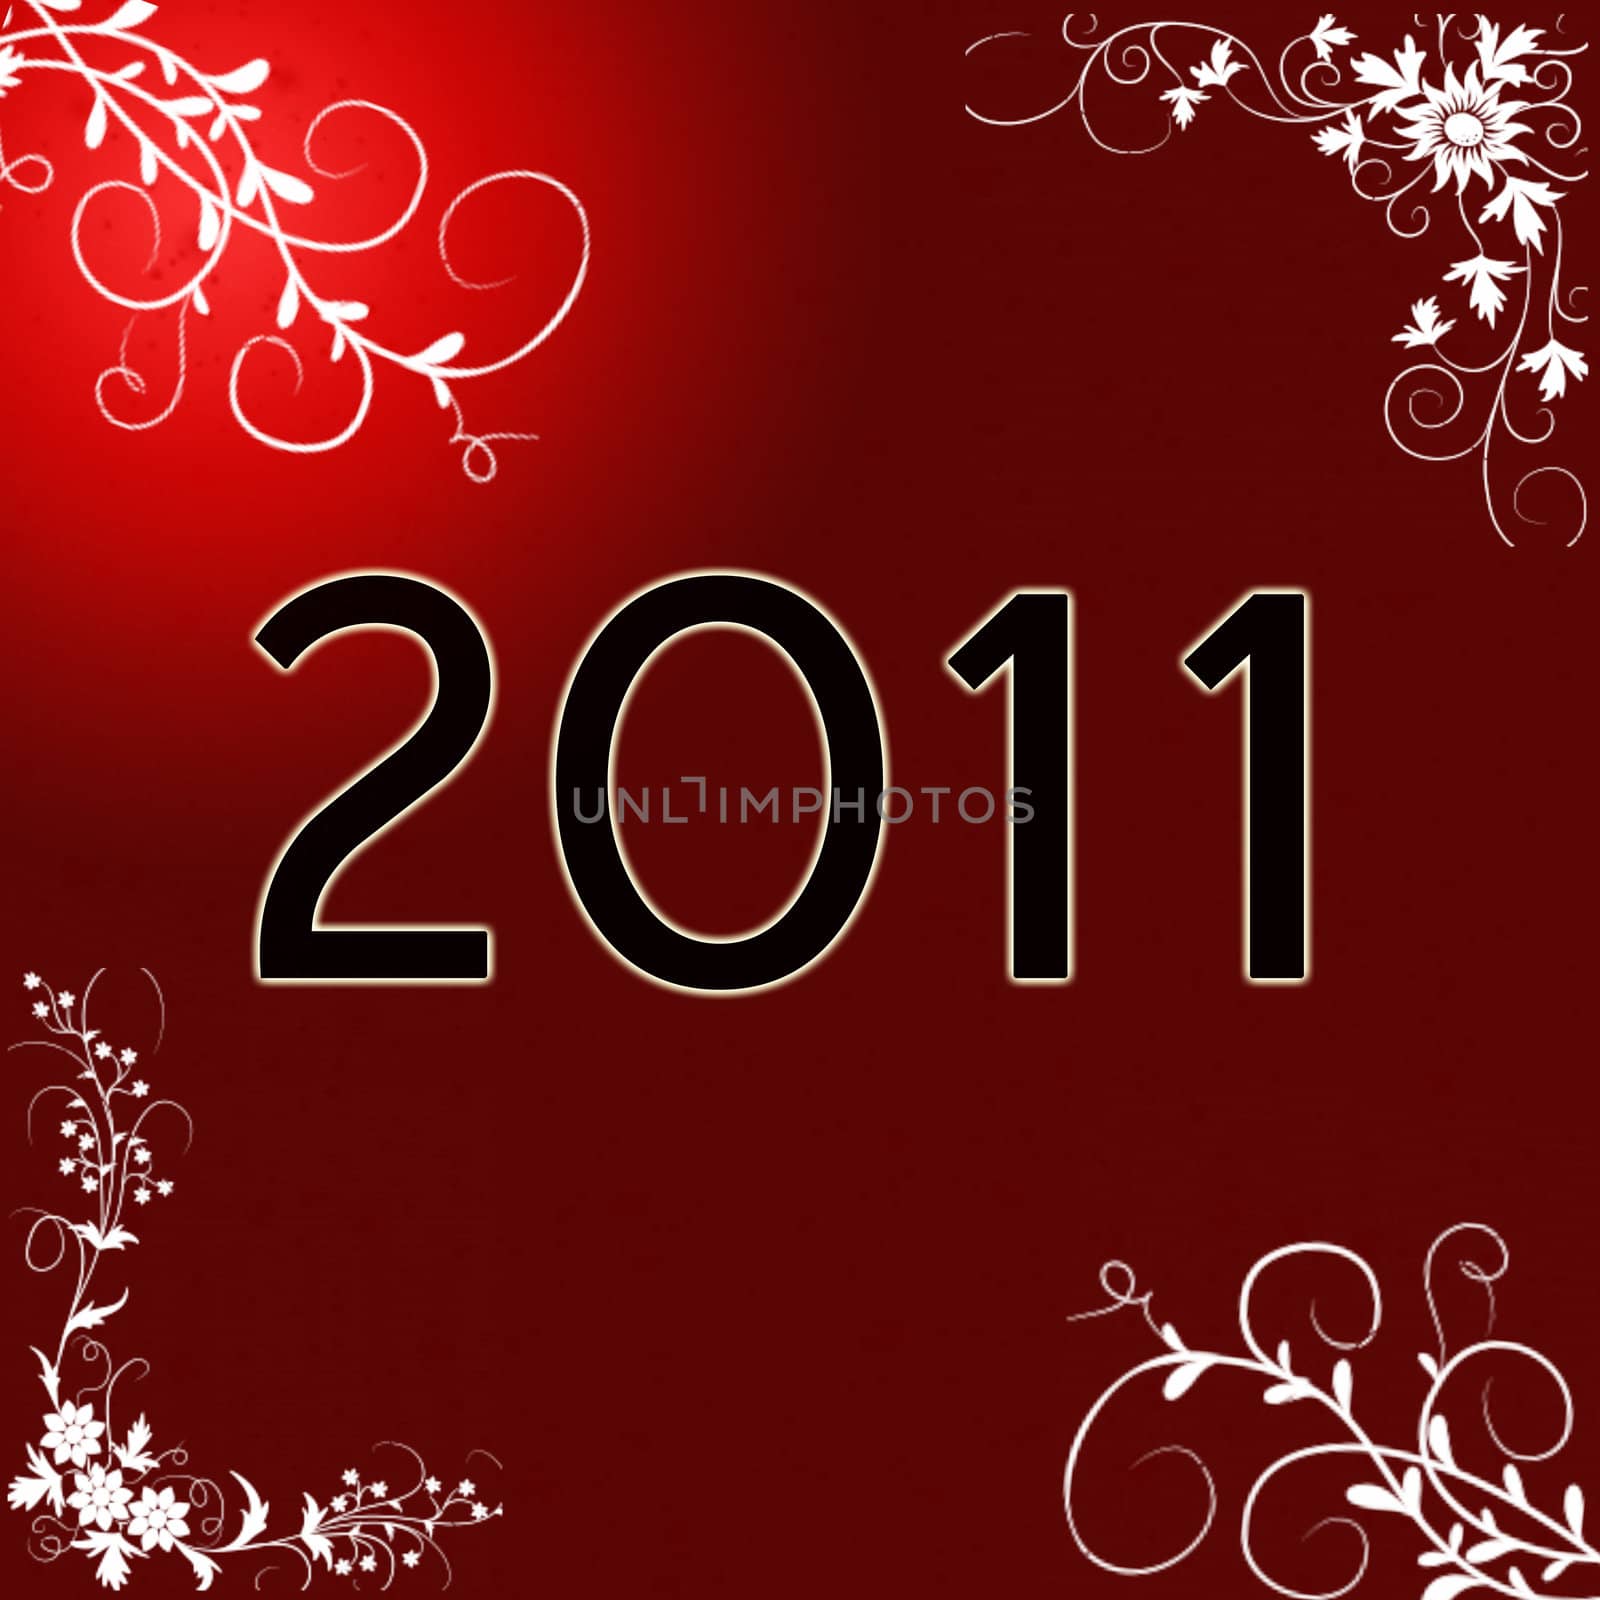 New Year holiday background illustration can be used as a greeting card